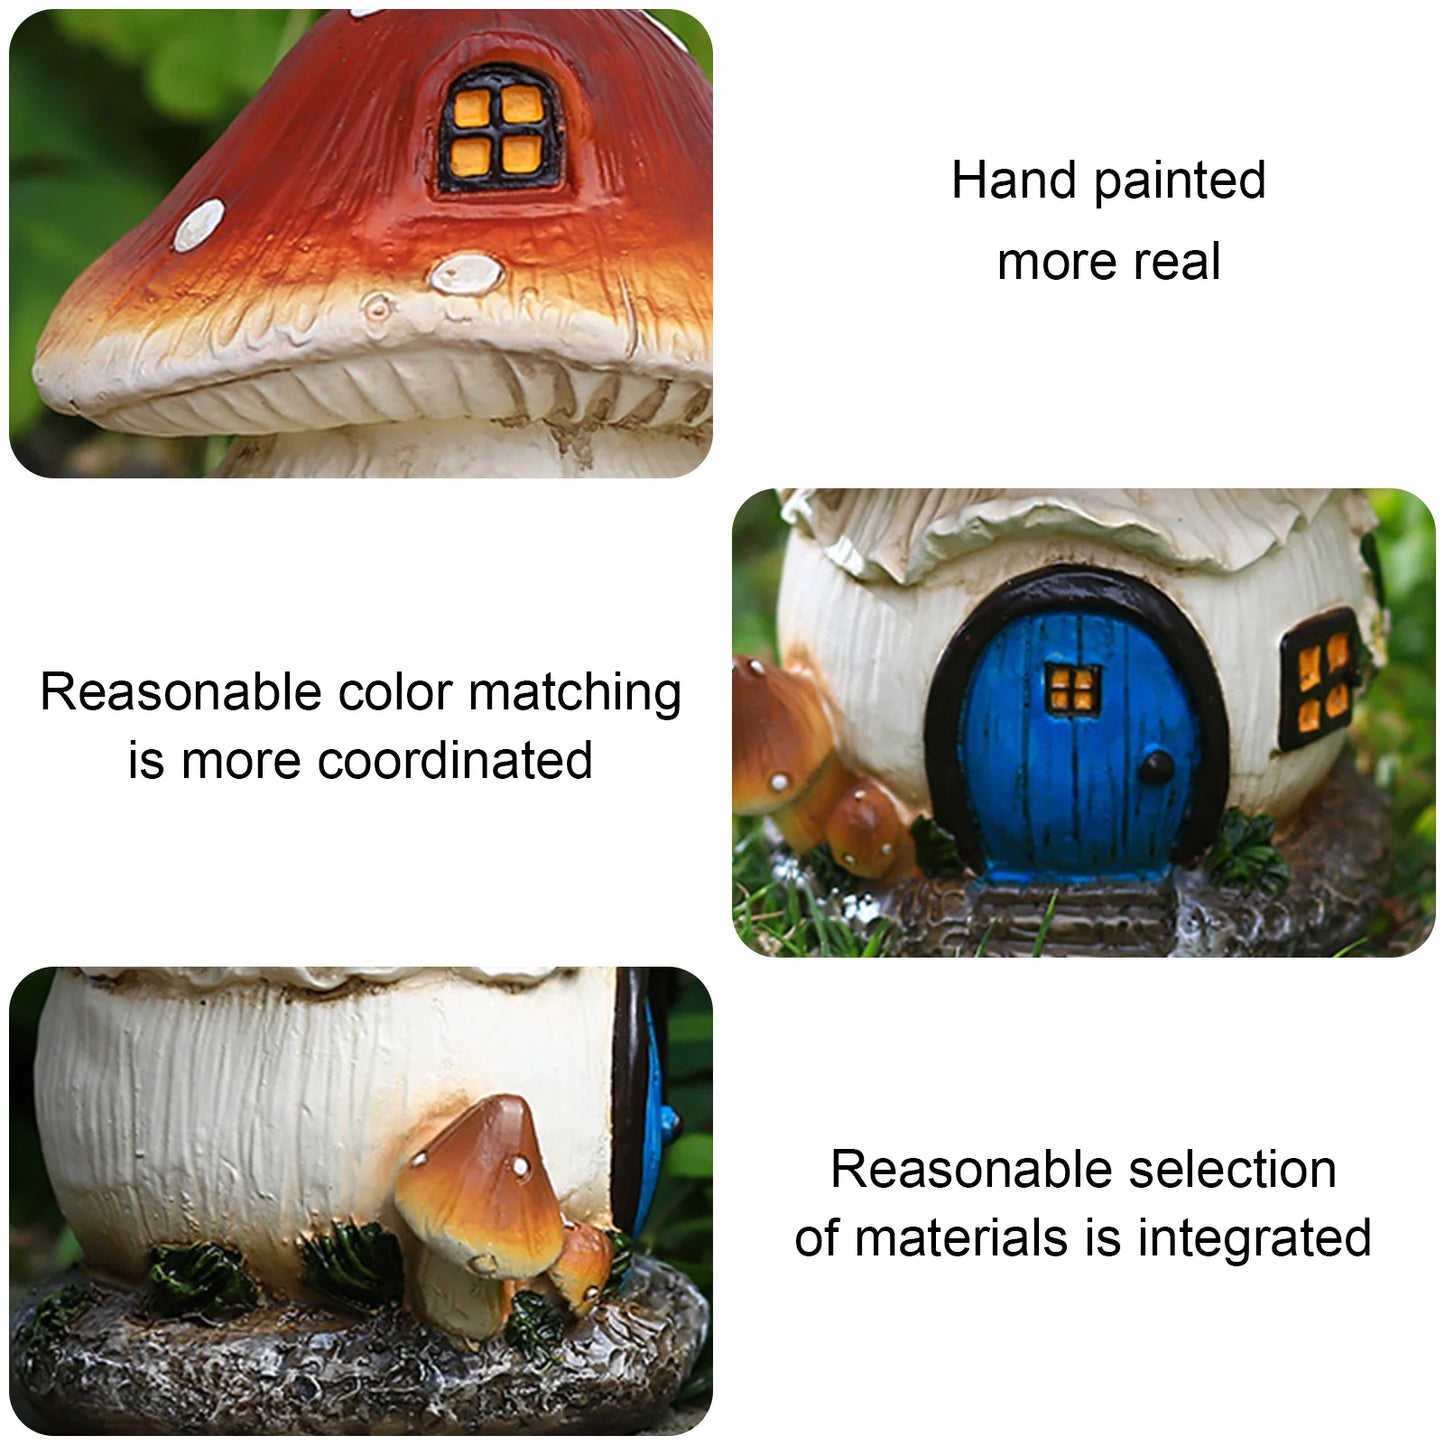 Resin Mushroom Decoration Lawn Garden Outdoor Decor Ornament for Pathway Patio Fairy House Statues Sculpture Gardener Gift